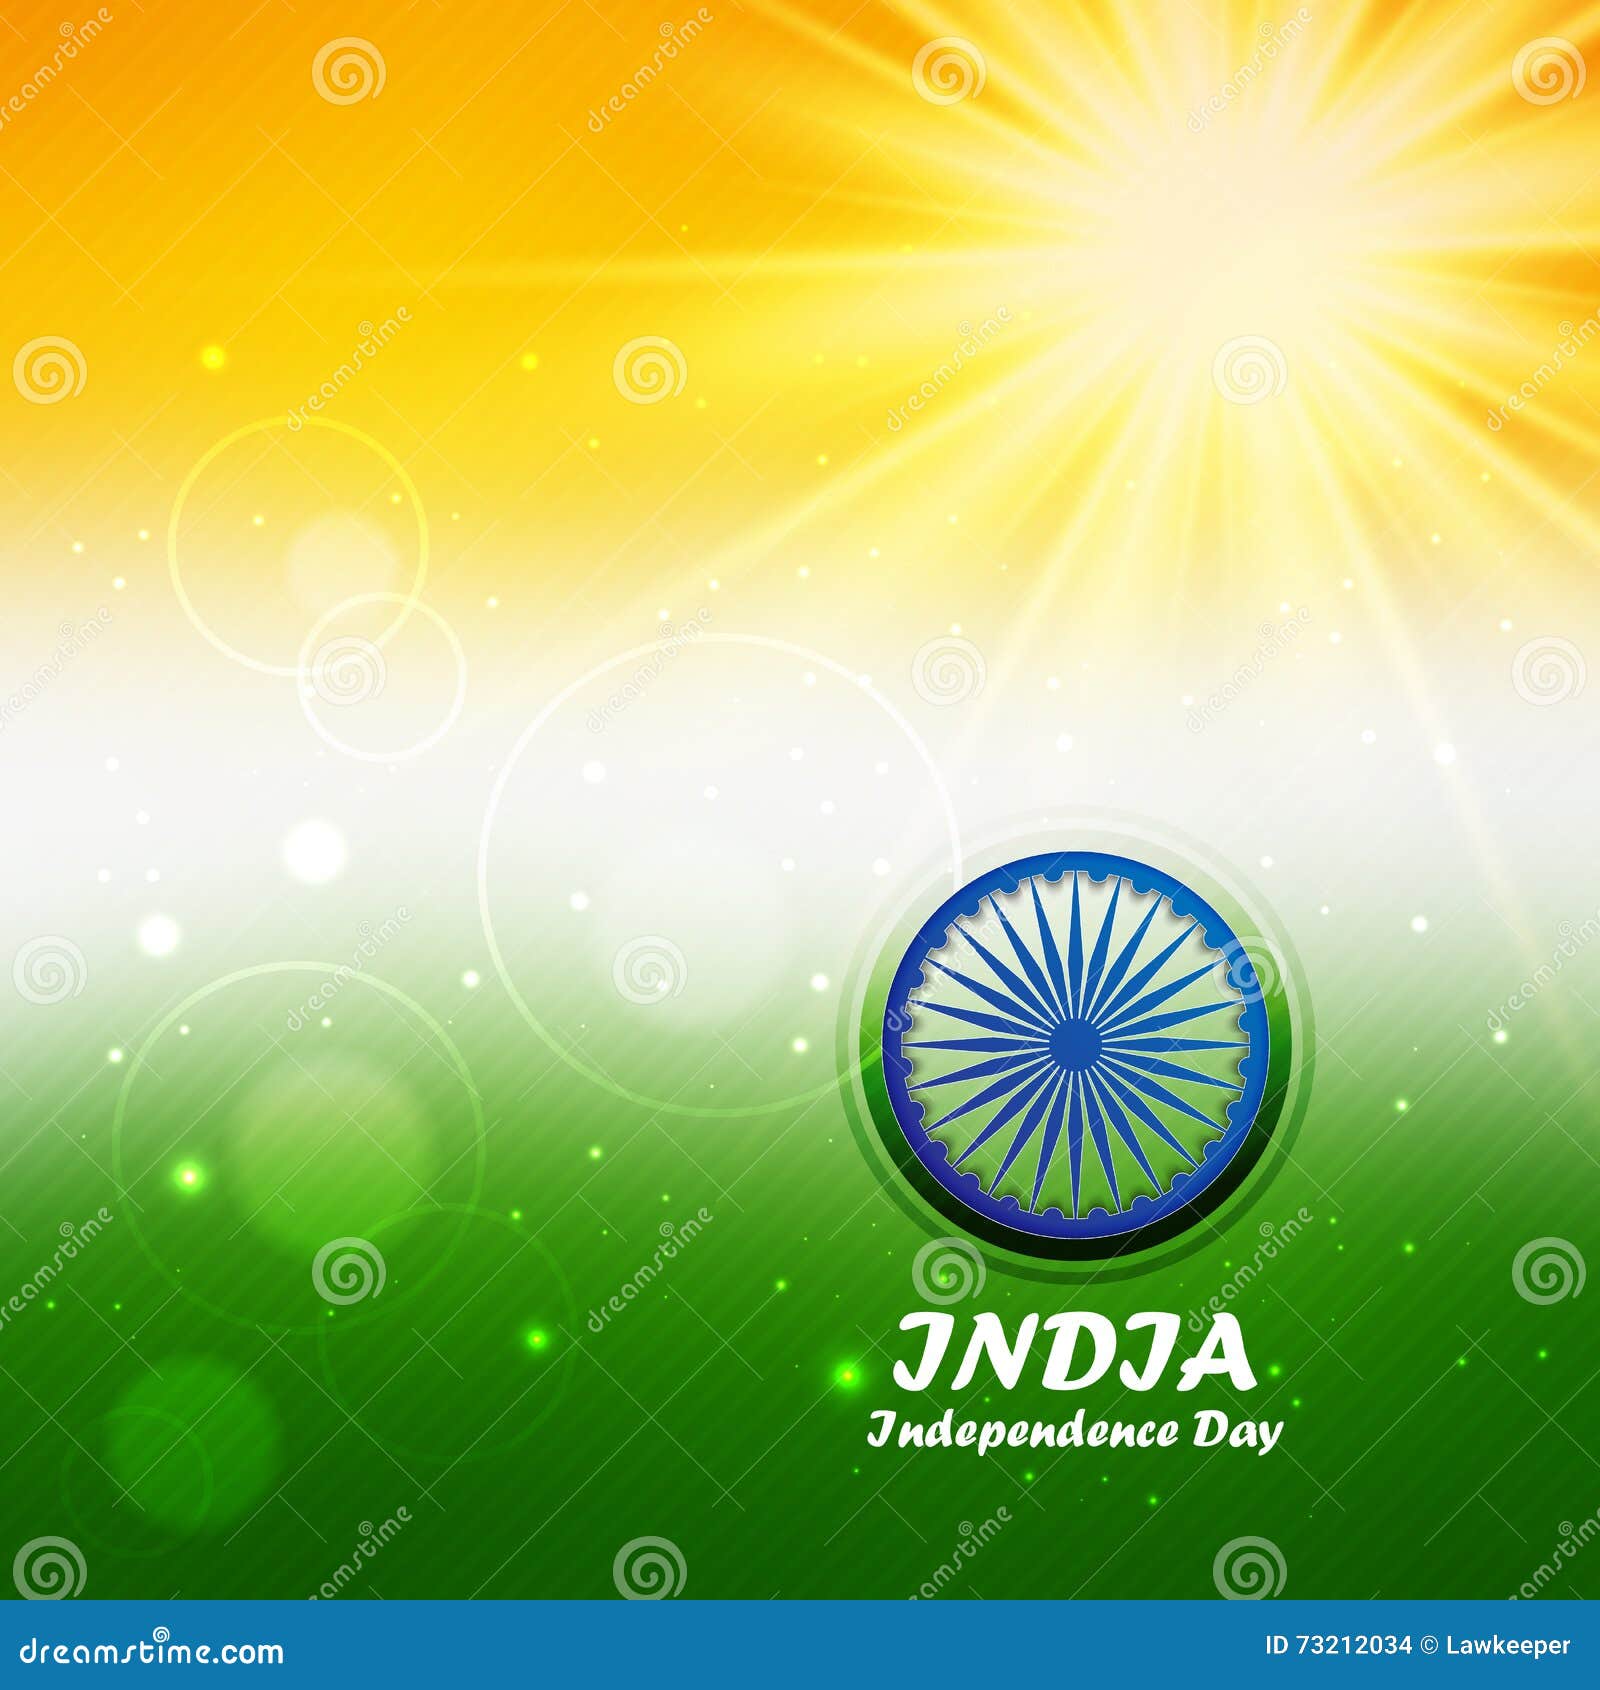 Indian Independence Day Background Stock Vector - Illustration of banner,  independence: 73212034